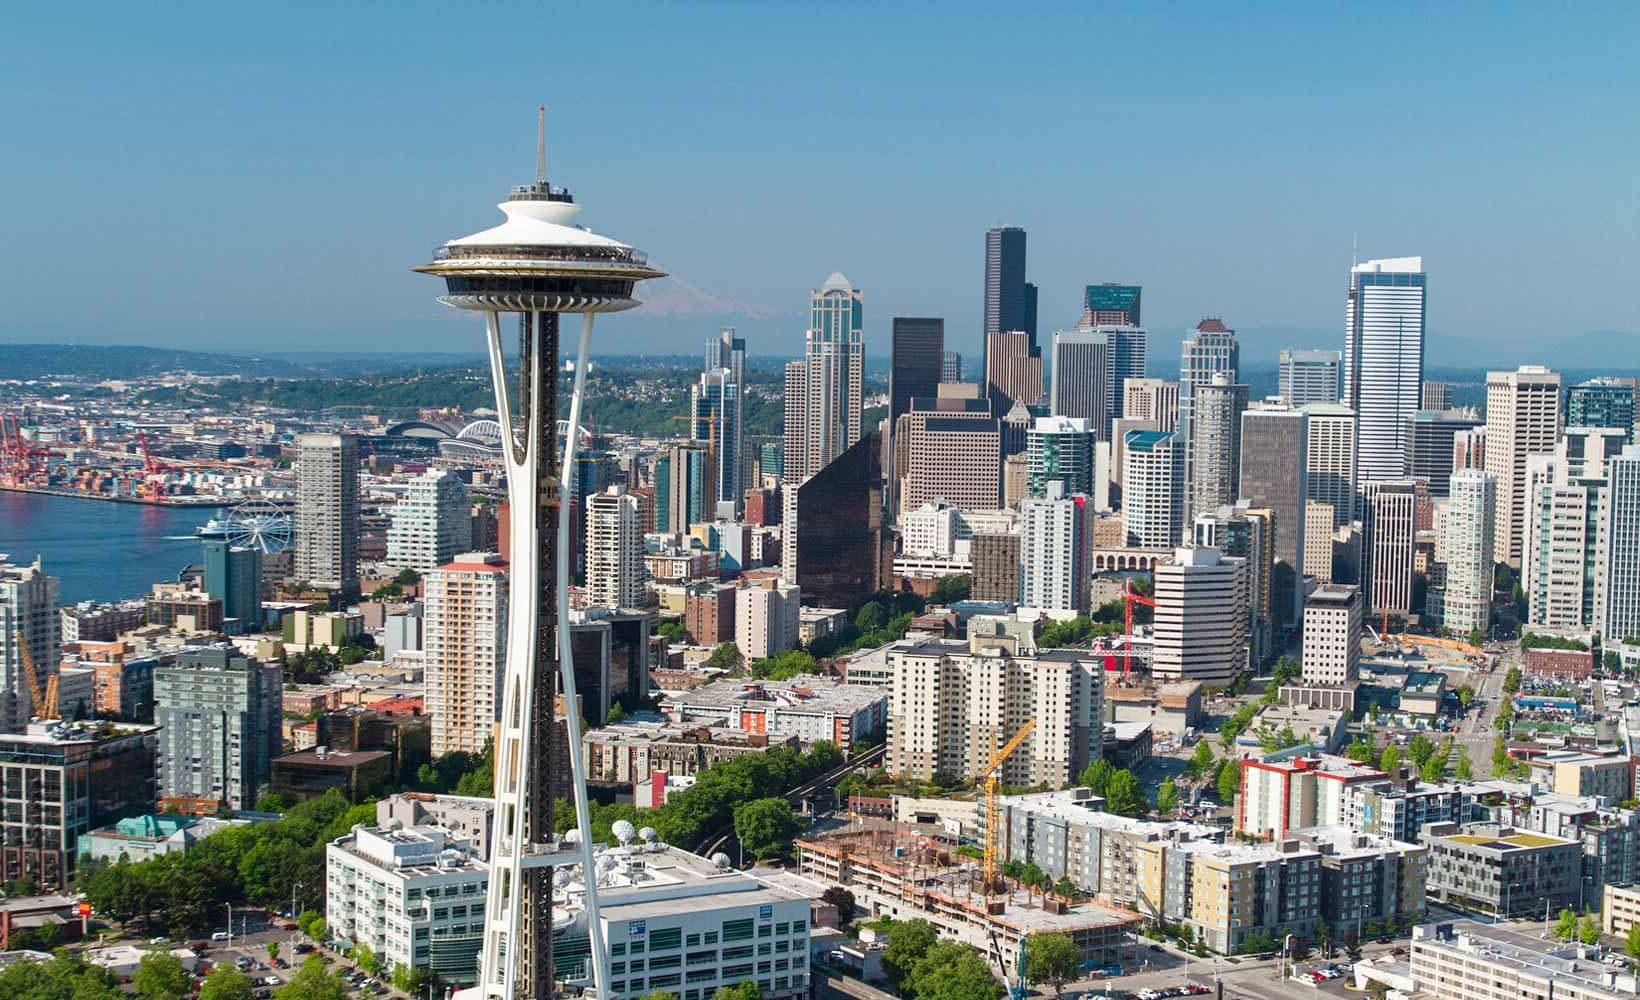 Aerial view of Seattle's Space Needle